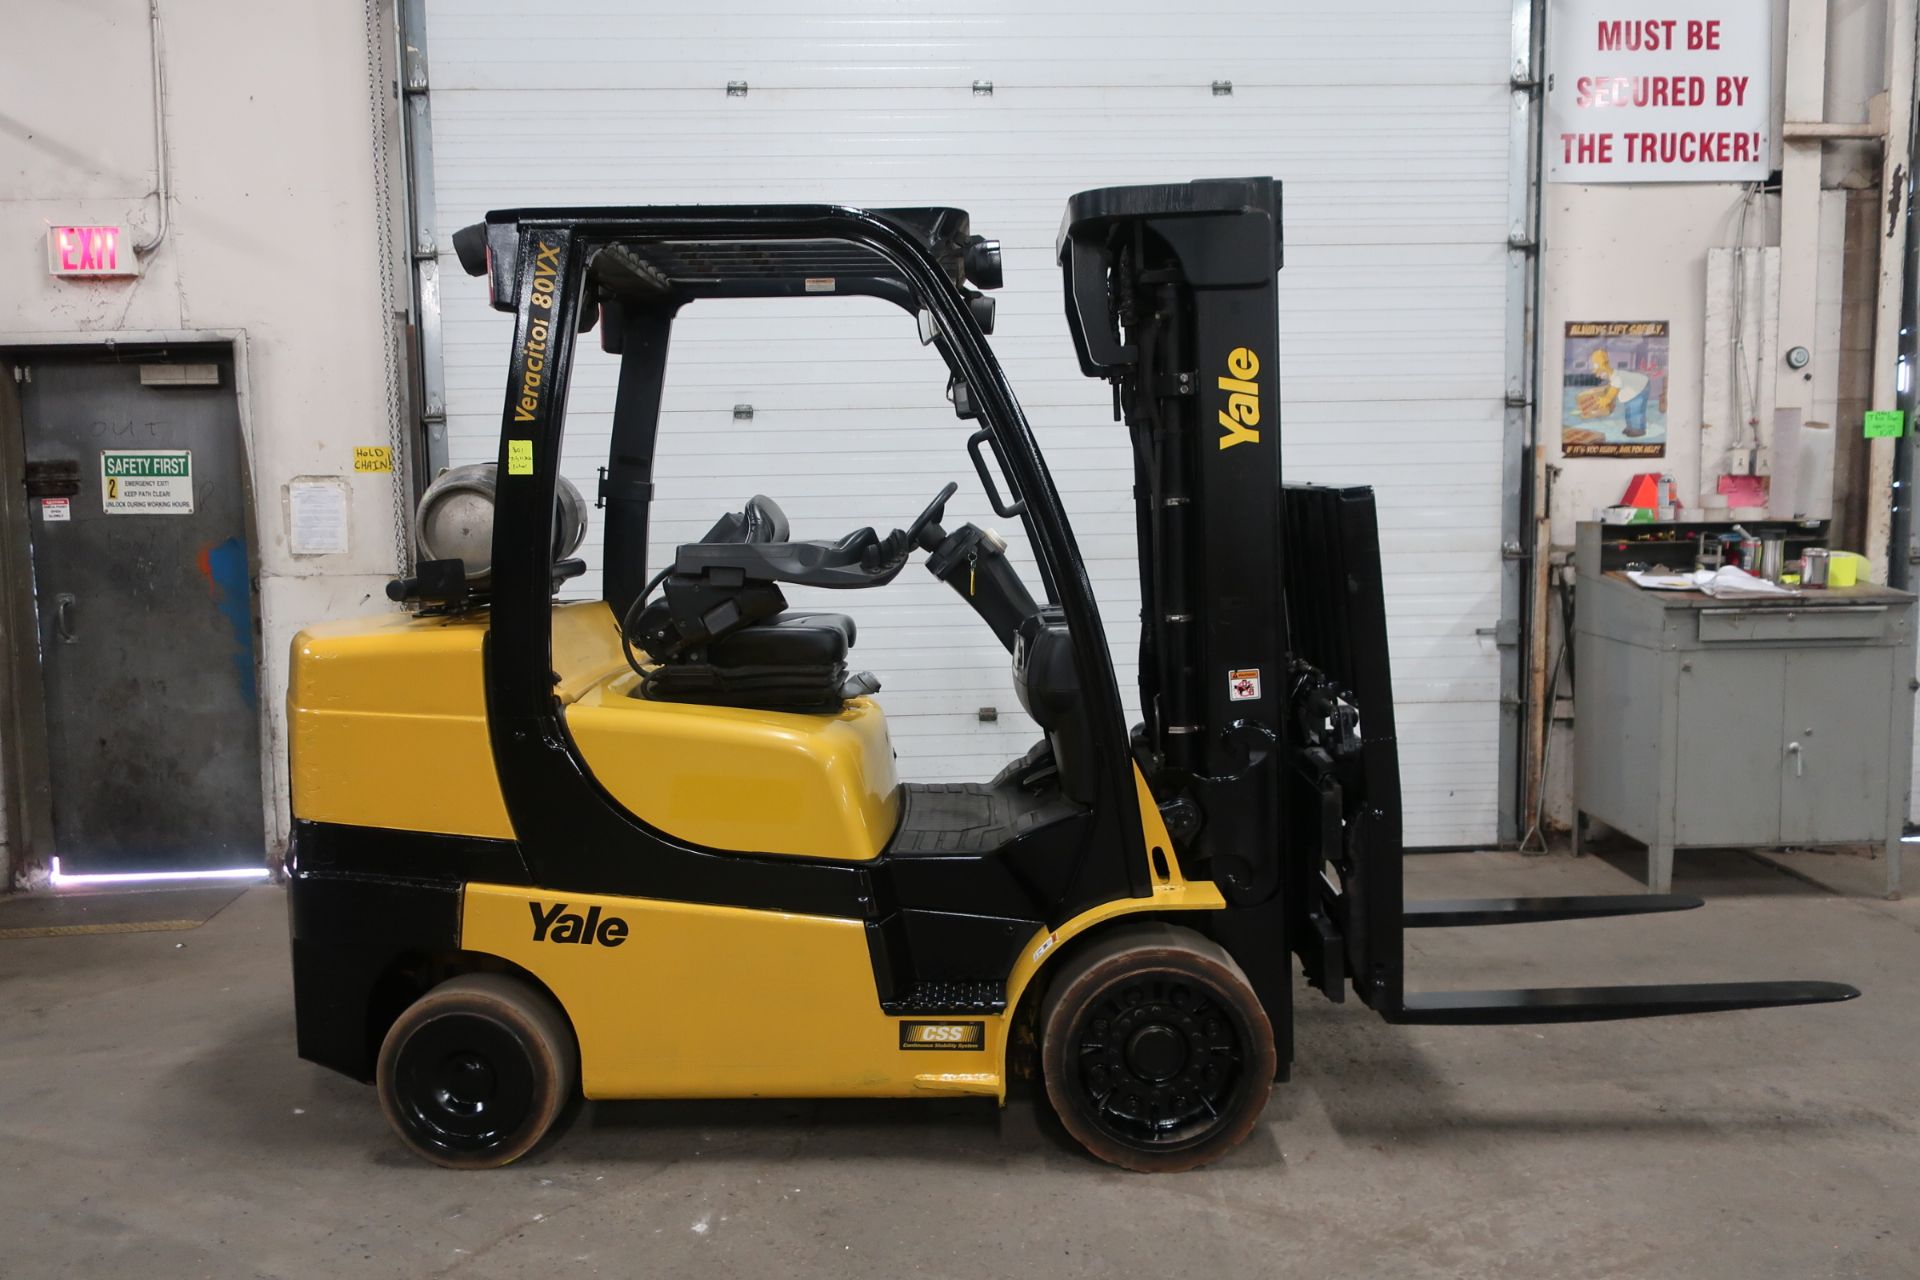 FREE CUSTOMS - 2015 Yale 8000lbs Capacity Forklift with 3-stage mast - LPG (propane) with